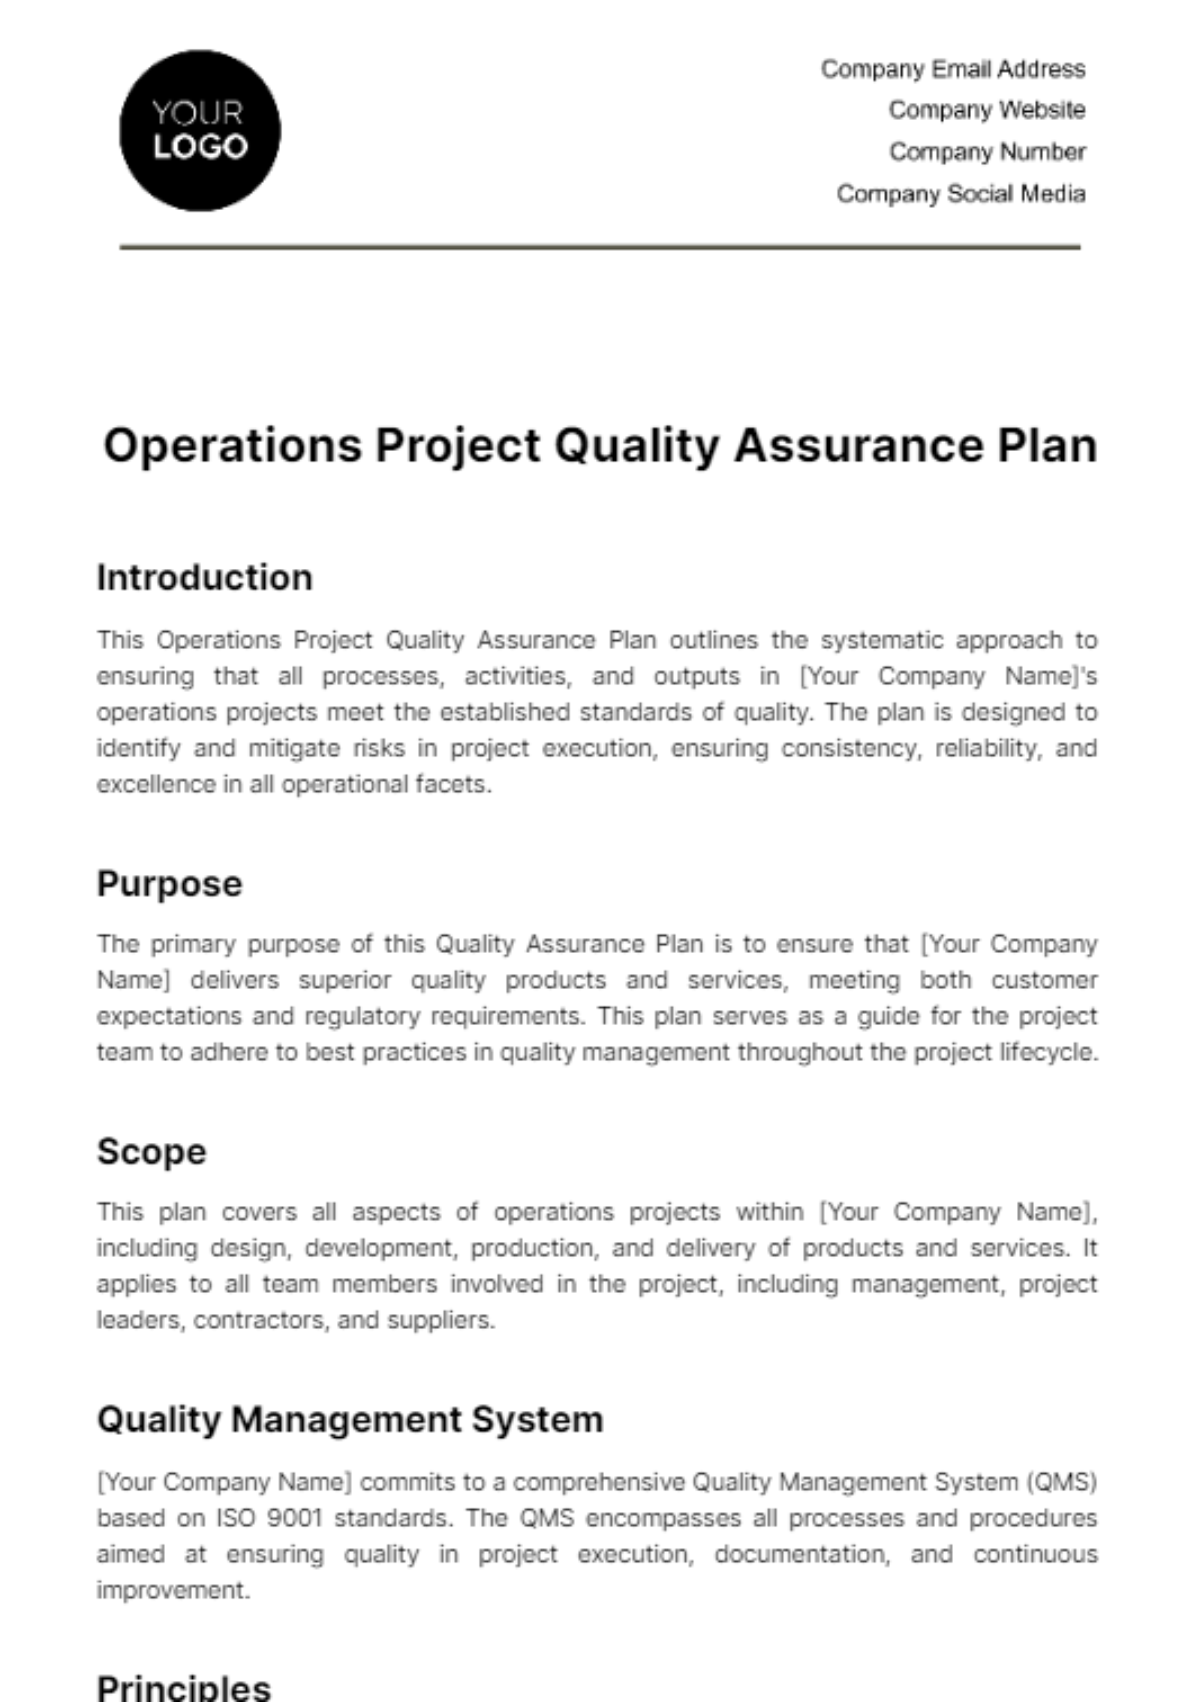 Operations Project Quality Assurance Plan Template